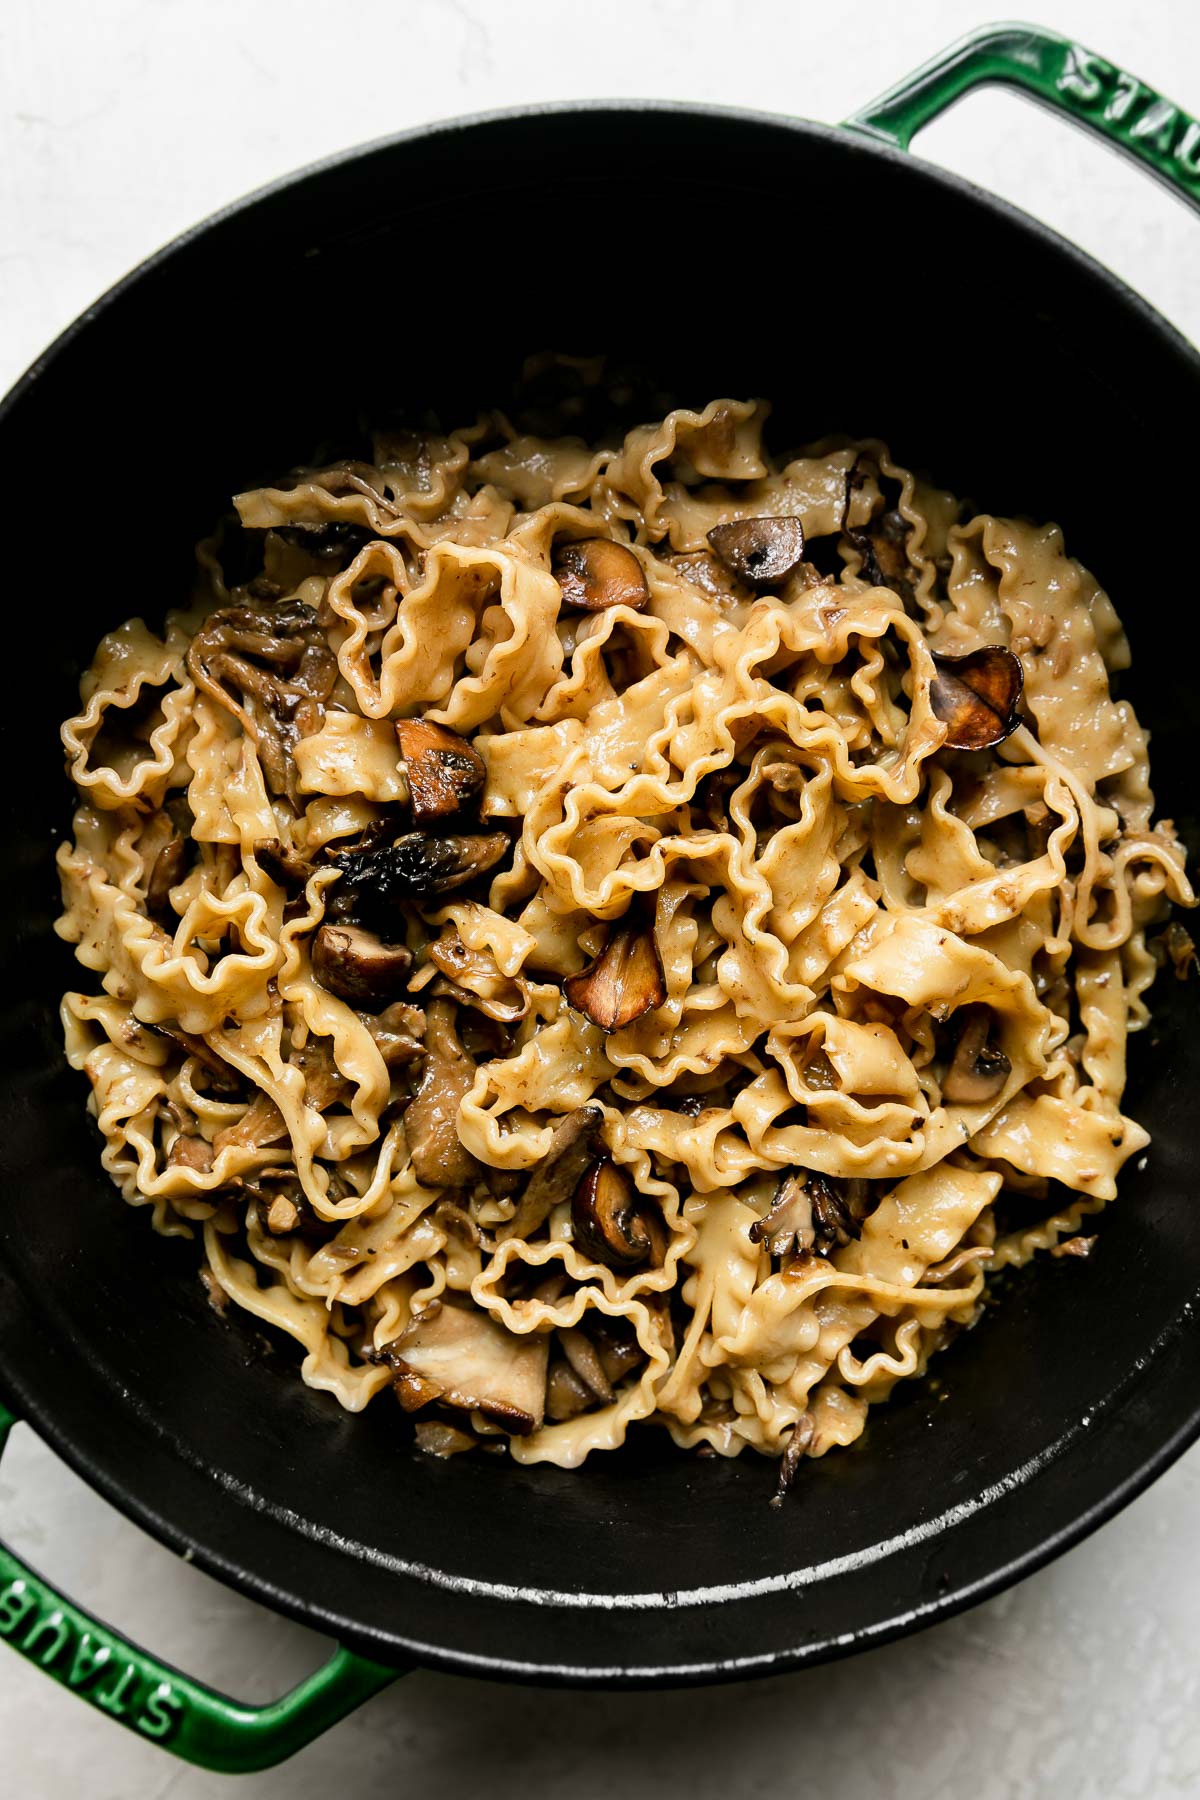 How to make wild mushroom ragu, step 7: finish the mushroom ragu pasta. Cooked pasta is added to & tossed with a wild mushroom ragu sauce in a green Staub cocotte. The cocotte sits atop a creamy white textured surface.